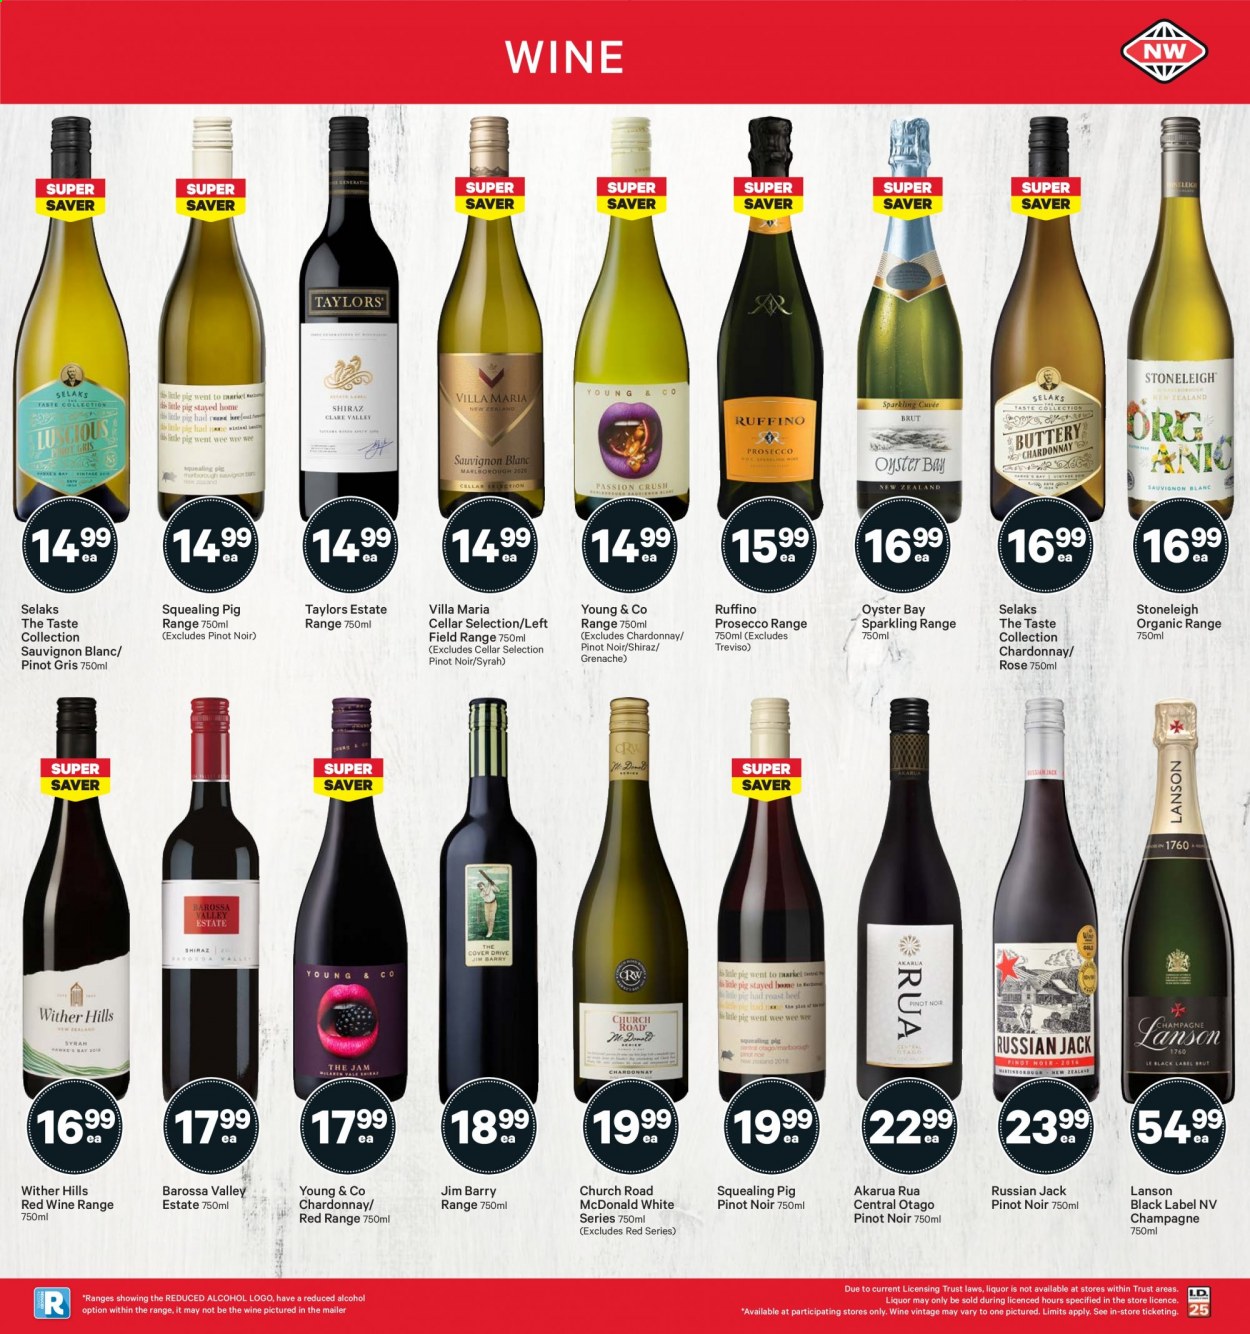 thumbnail - New World mailer - 09.08.2021 - 15.08.2021 - Sales products - oysters, red wine, white wine, champagne, prosecco, Chardonnay, wine, Pinot Noir, Lanson, alcohol, Wither Hills, Syrah, Young & Co, Shiraz, Grenache, Pinot Grigio, Sauvignon Blanc, rosé wine. Page 31.